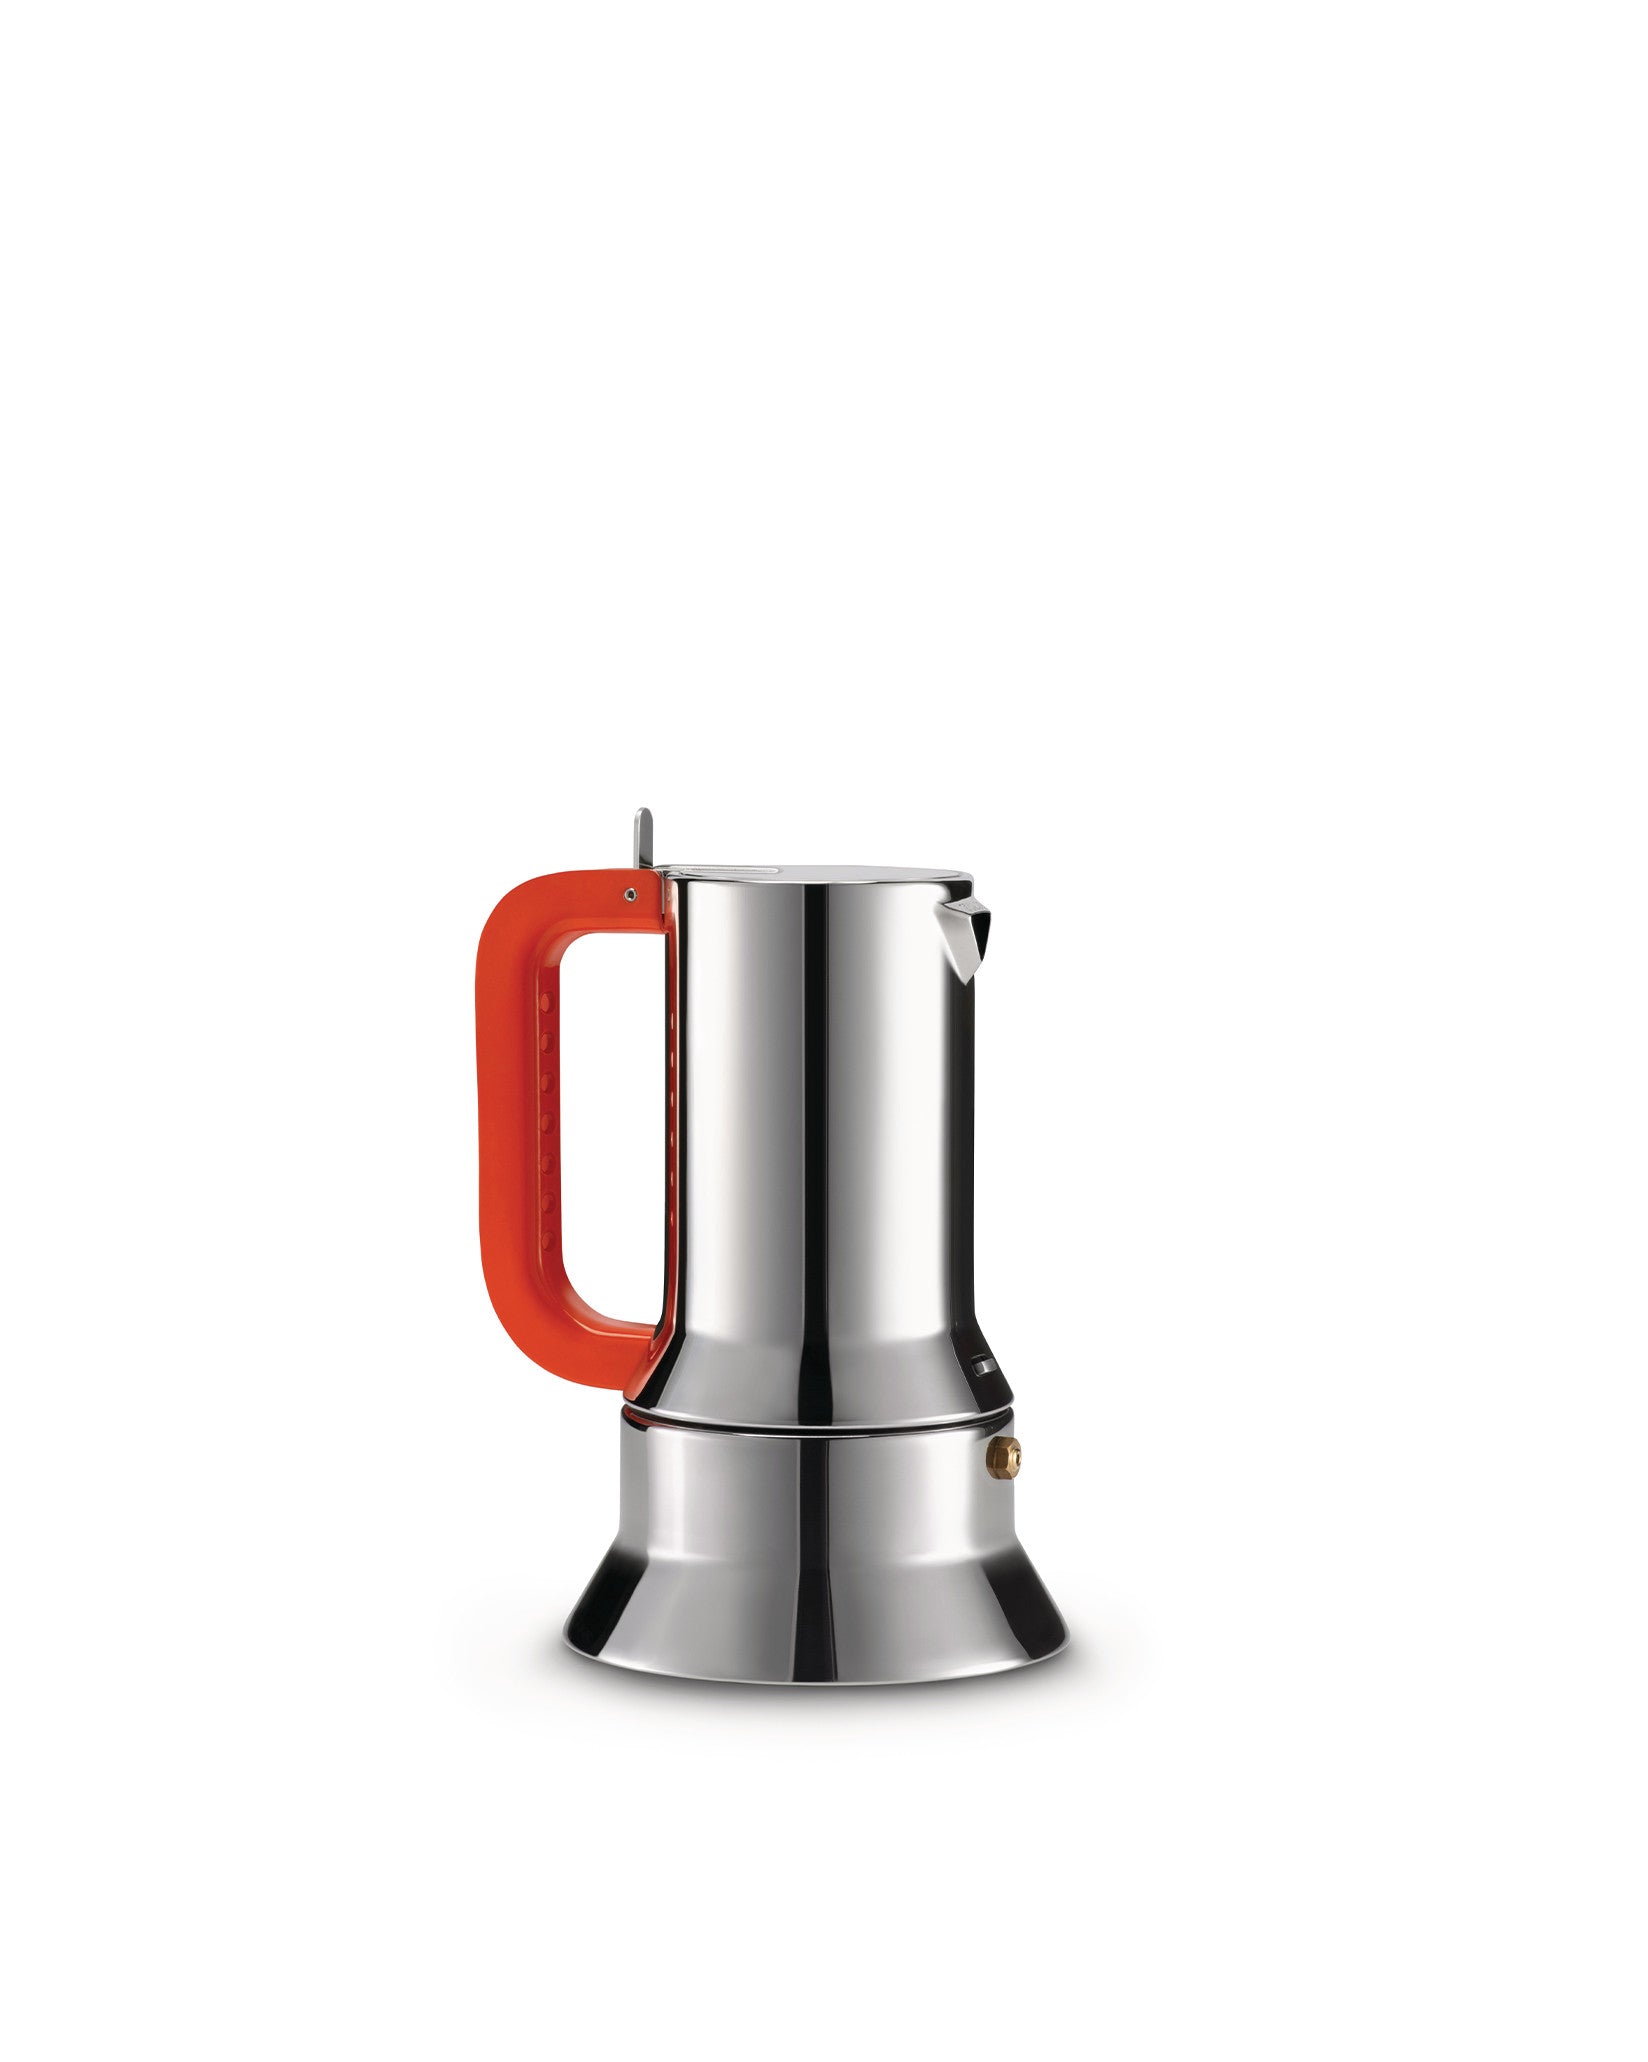 Alessi 9090 Espresso Coffee Maker Perforated Handle - 3 Cups